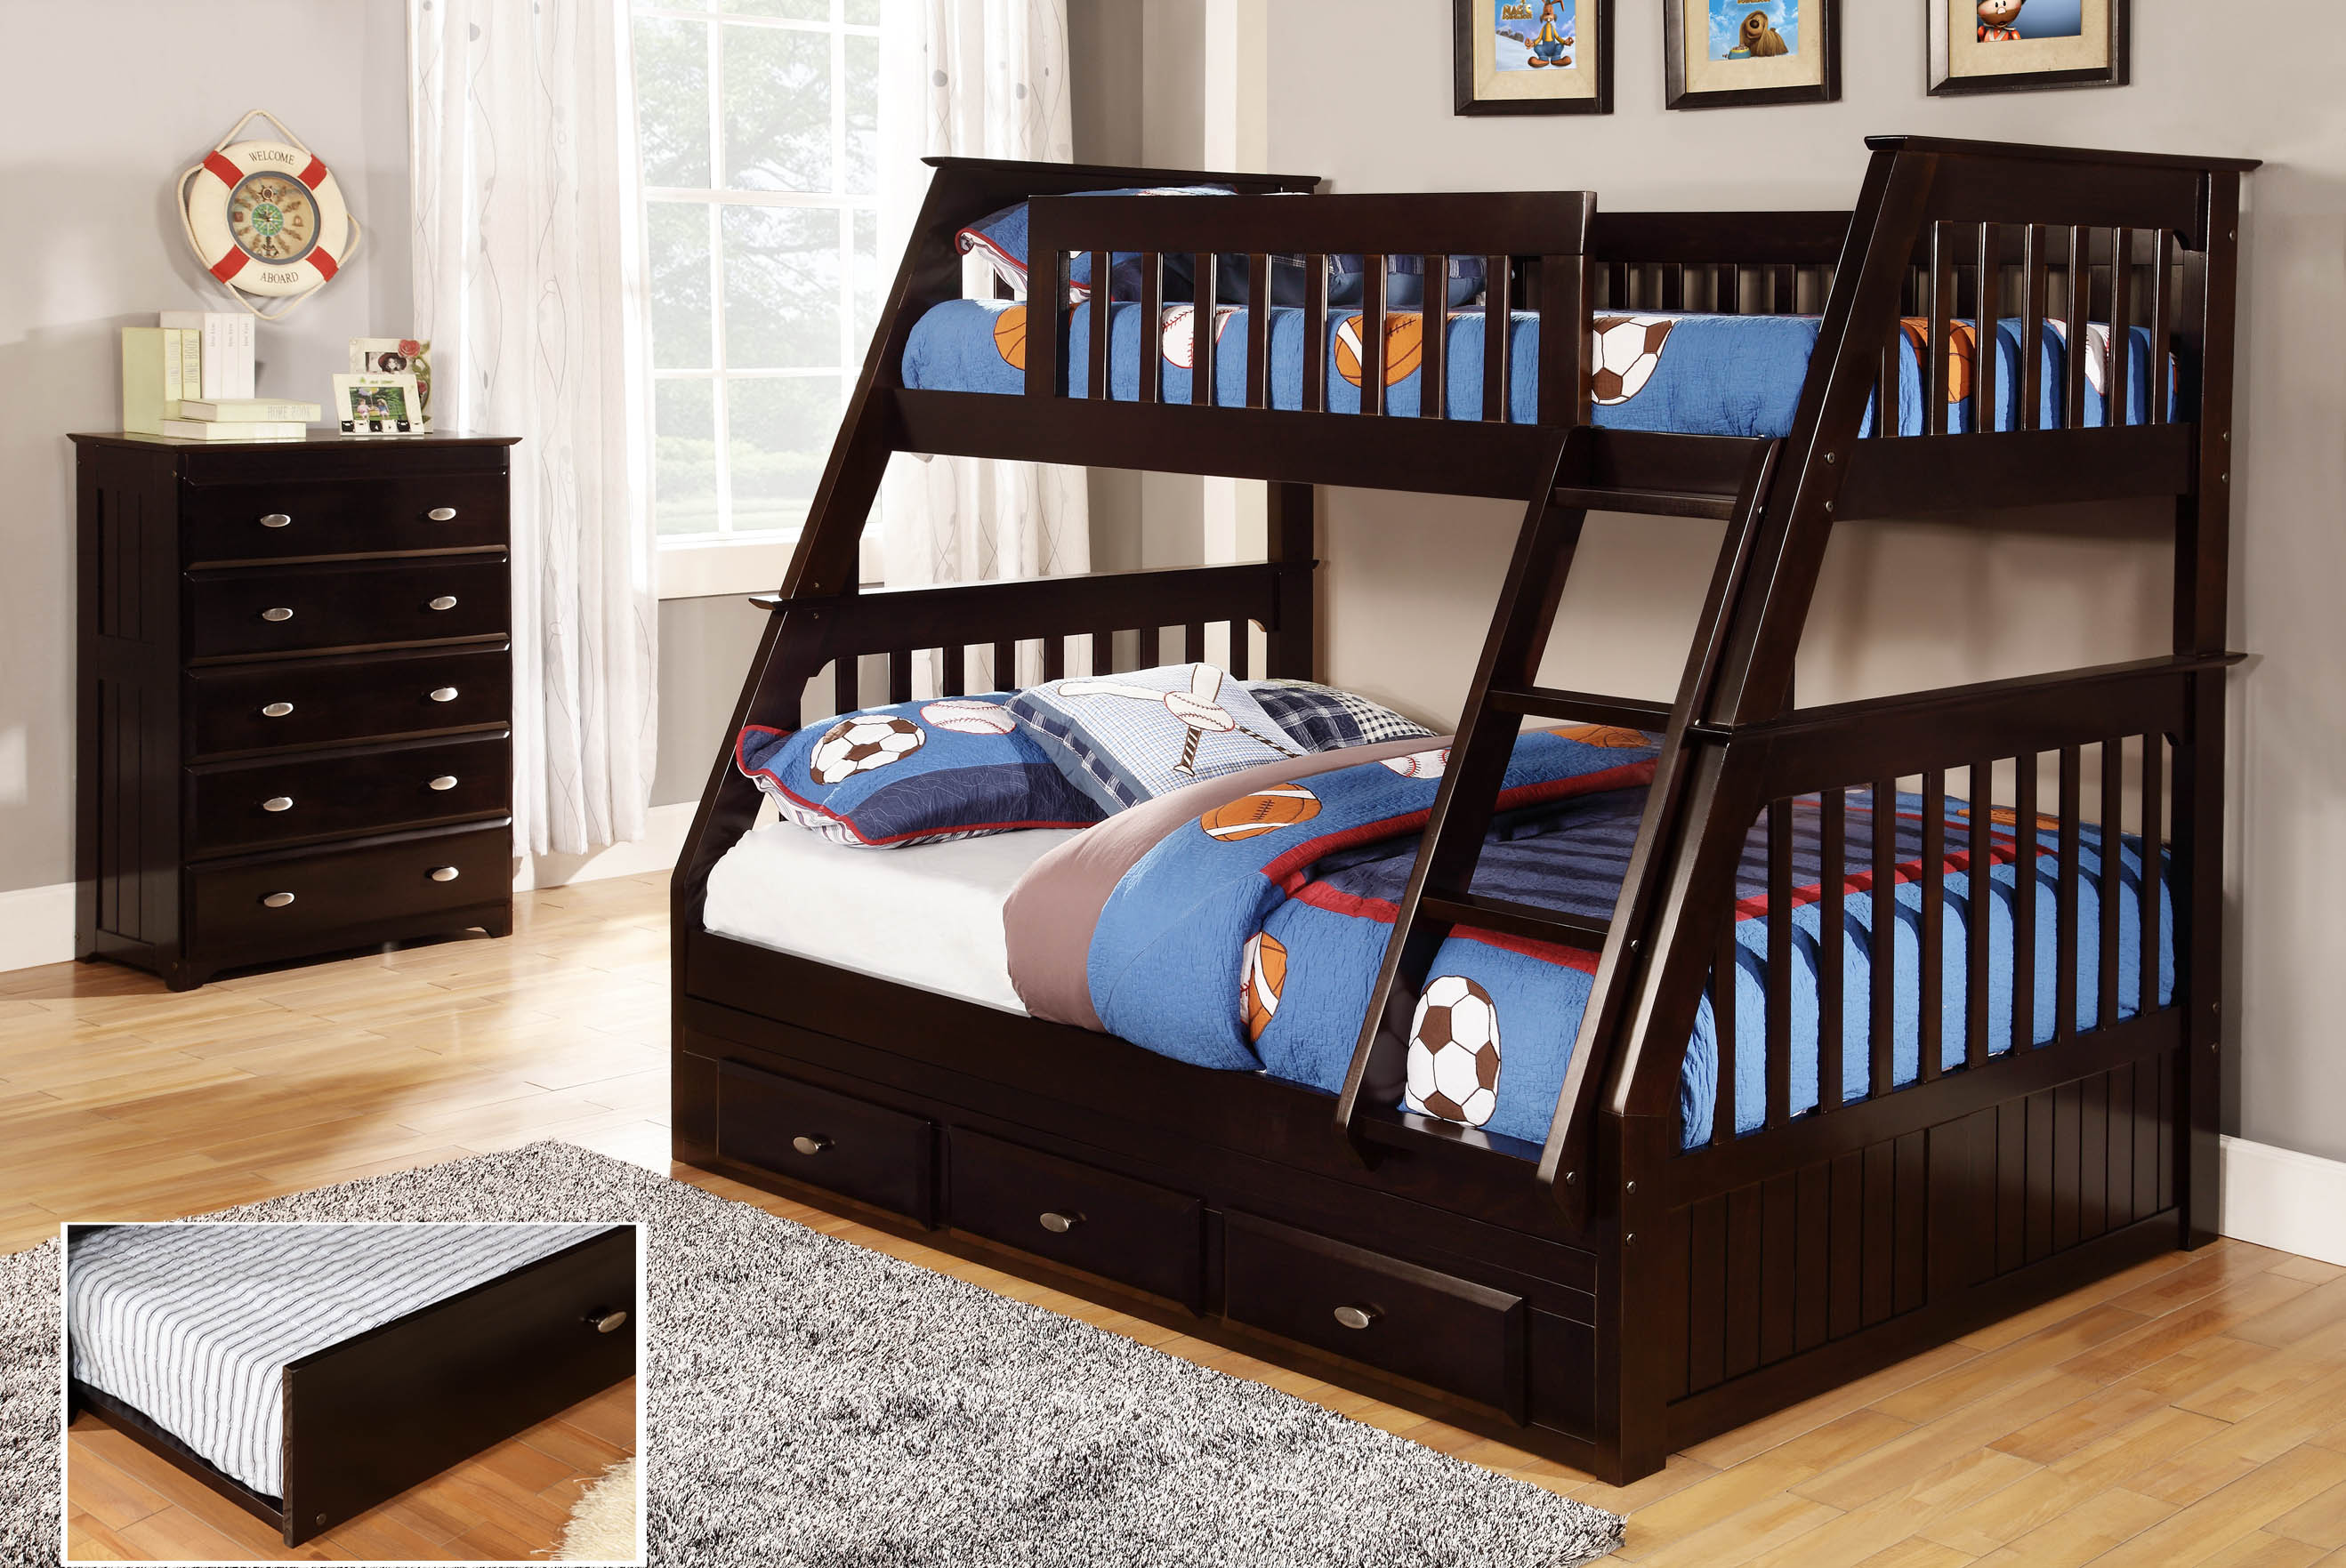 Espresso Mission Bunk Bed Kfs S, Discovery World Furniture Twin Over Twin Bunk Bed